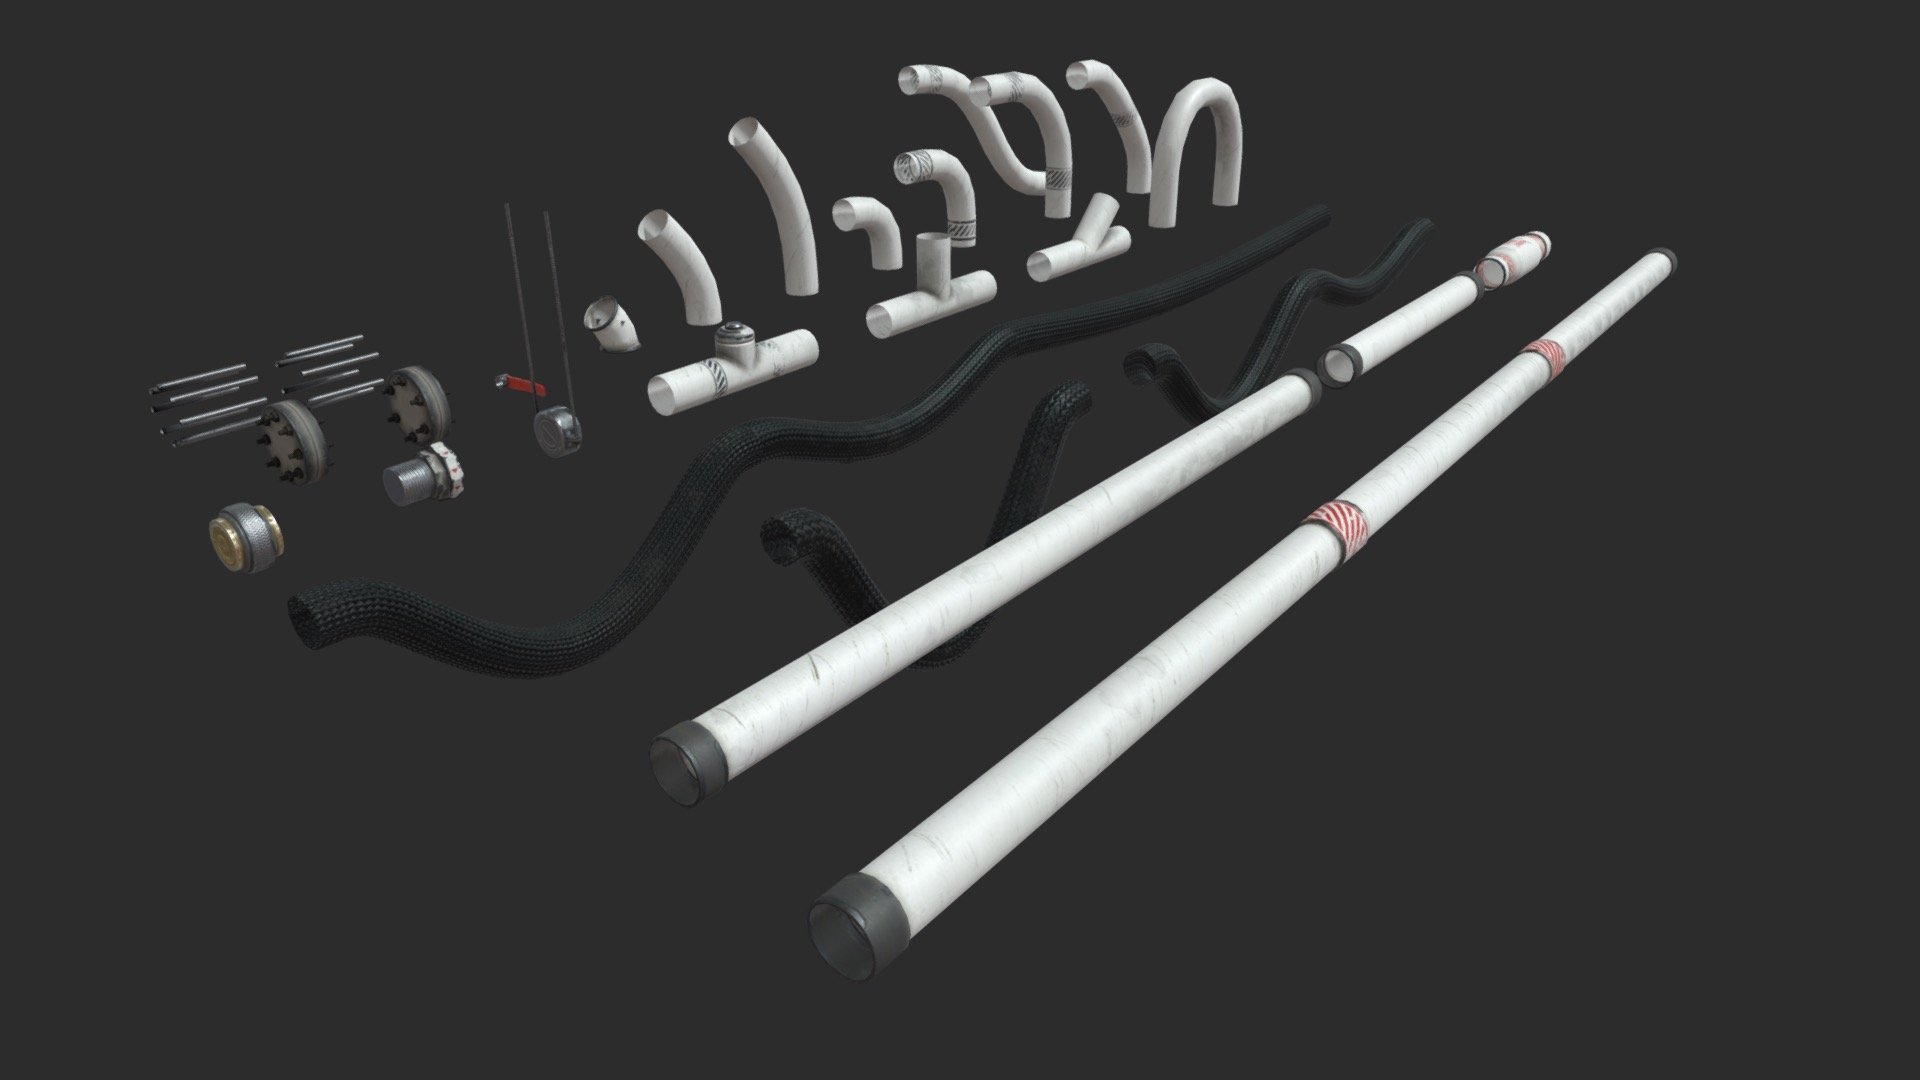 This modular pipes asset pack including 27 individual set Ø10 pipes with 4 LODs and colliders to get a good optimization. All elements can easily be positioned together by moving in 10cm increments. Also, this pack includes 37 pre-assembled sets to allow you to speed up your assemblies. 



INDIVIDUAL SETS INCLUDE :


4 elbow 90°
3 elbow 45°
1 U pipe
1 S pipe
2 T pipes
1 Y pipe
4 straight pipes
3 flexible pipes
2 screw joints
1 mounting bracket
1 handle valve
2 end of pipes
2 threaded rod sets

SPECIFICATIONS


Objects : 64
Polygons : 4975

GAME SPECS


LODs : Yes (inside FBX for Unity &amp; Unreal)
Numbers of LODs : 4
Collider : Yes
Lightmap UV : No

EXPORTED FORMATS


FBX
Collada
OBJ

TEXTURES


Materials in scene : 1
Textures sizes : 4K
Textures types : Base Color, Metallic, Roughness, Normal (DirectX &amp; OpenGL), Heigh &amp; AO (also Unity &amp; Unreal workflow maps)
Textures format : TGA &amp; PNG
 - Modular Pipes - Sci-Fi Painted White - Buy Royalty Free 3D model by KangaroOz 3D (@KangaroOz-3D) 3d model